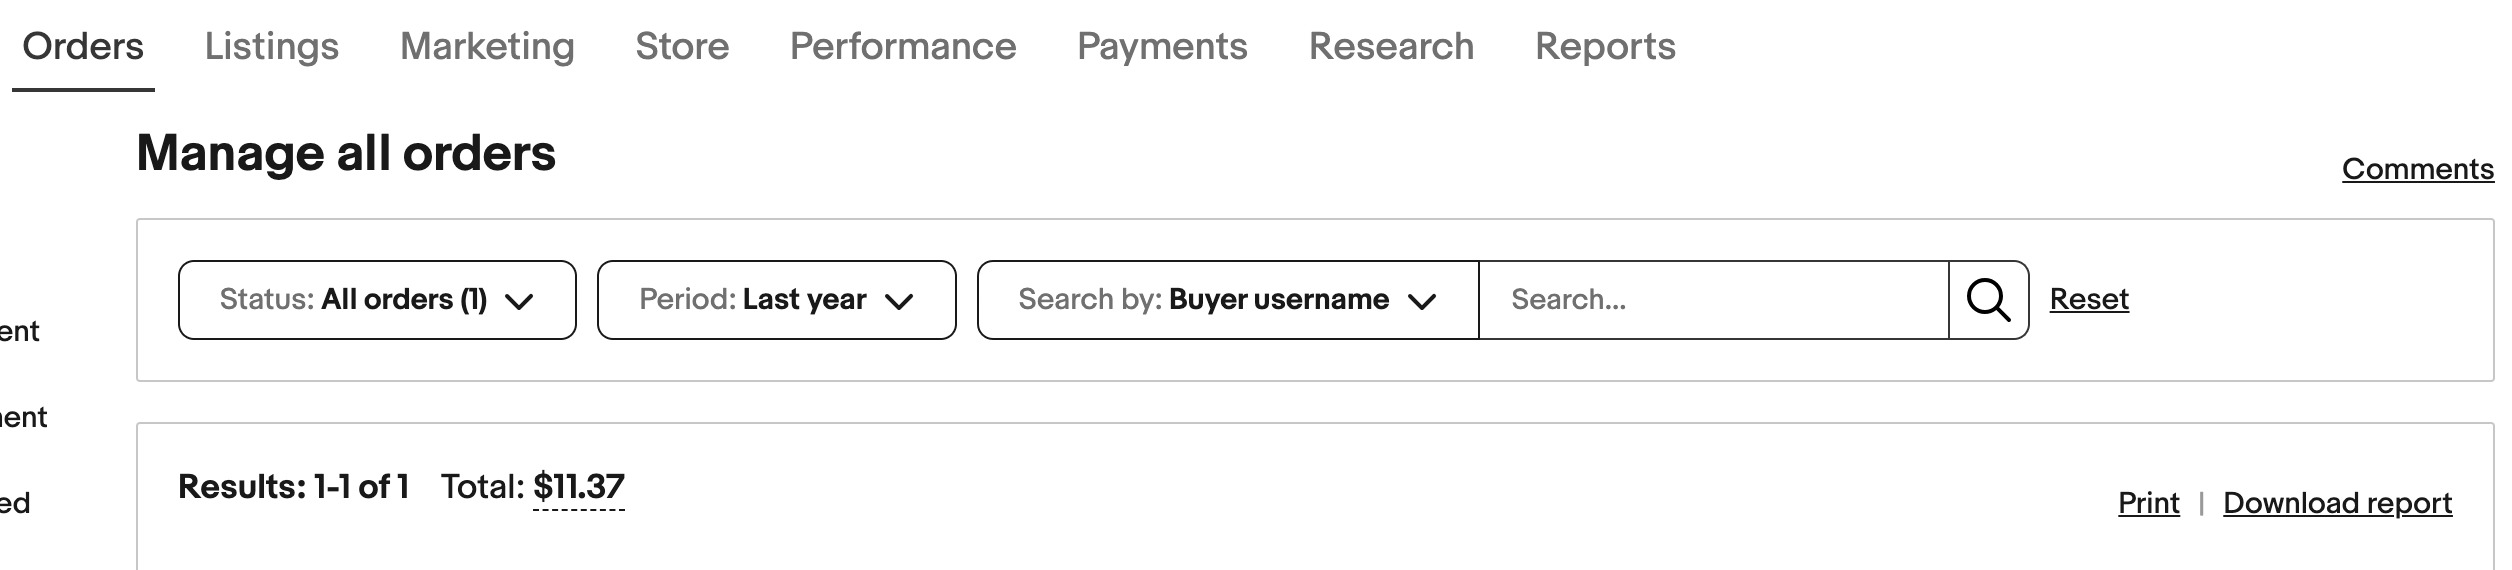 Image showing the process of exporting orders from eBay Seller Hub